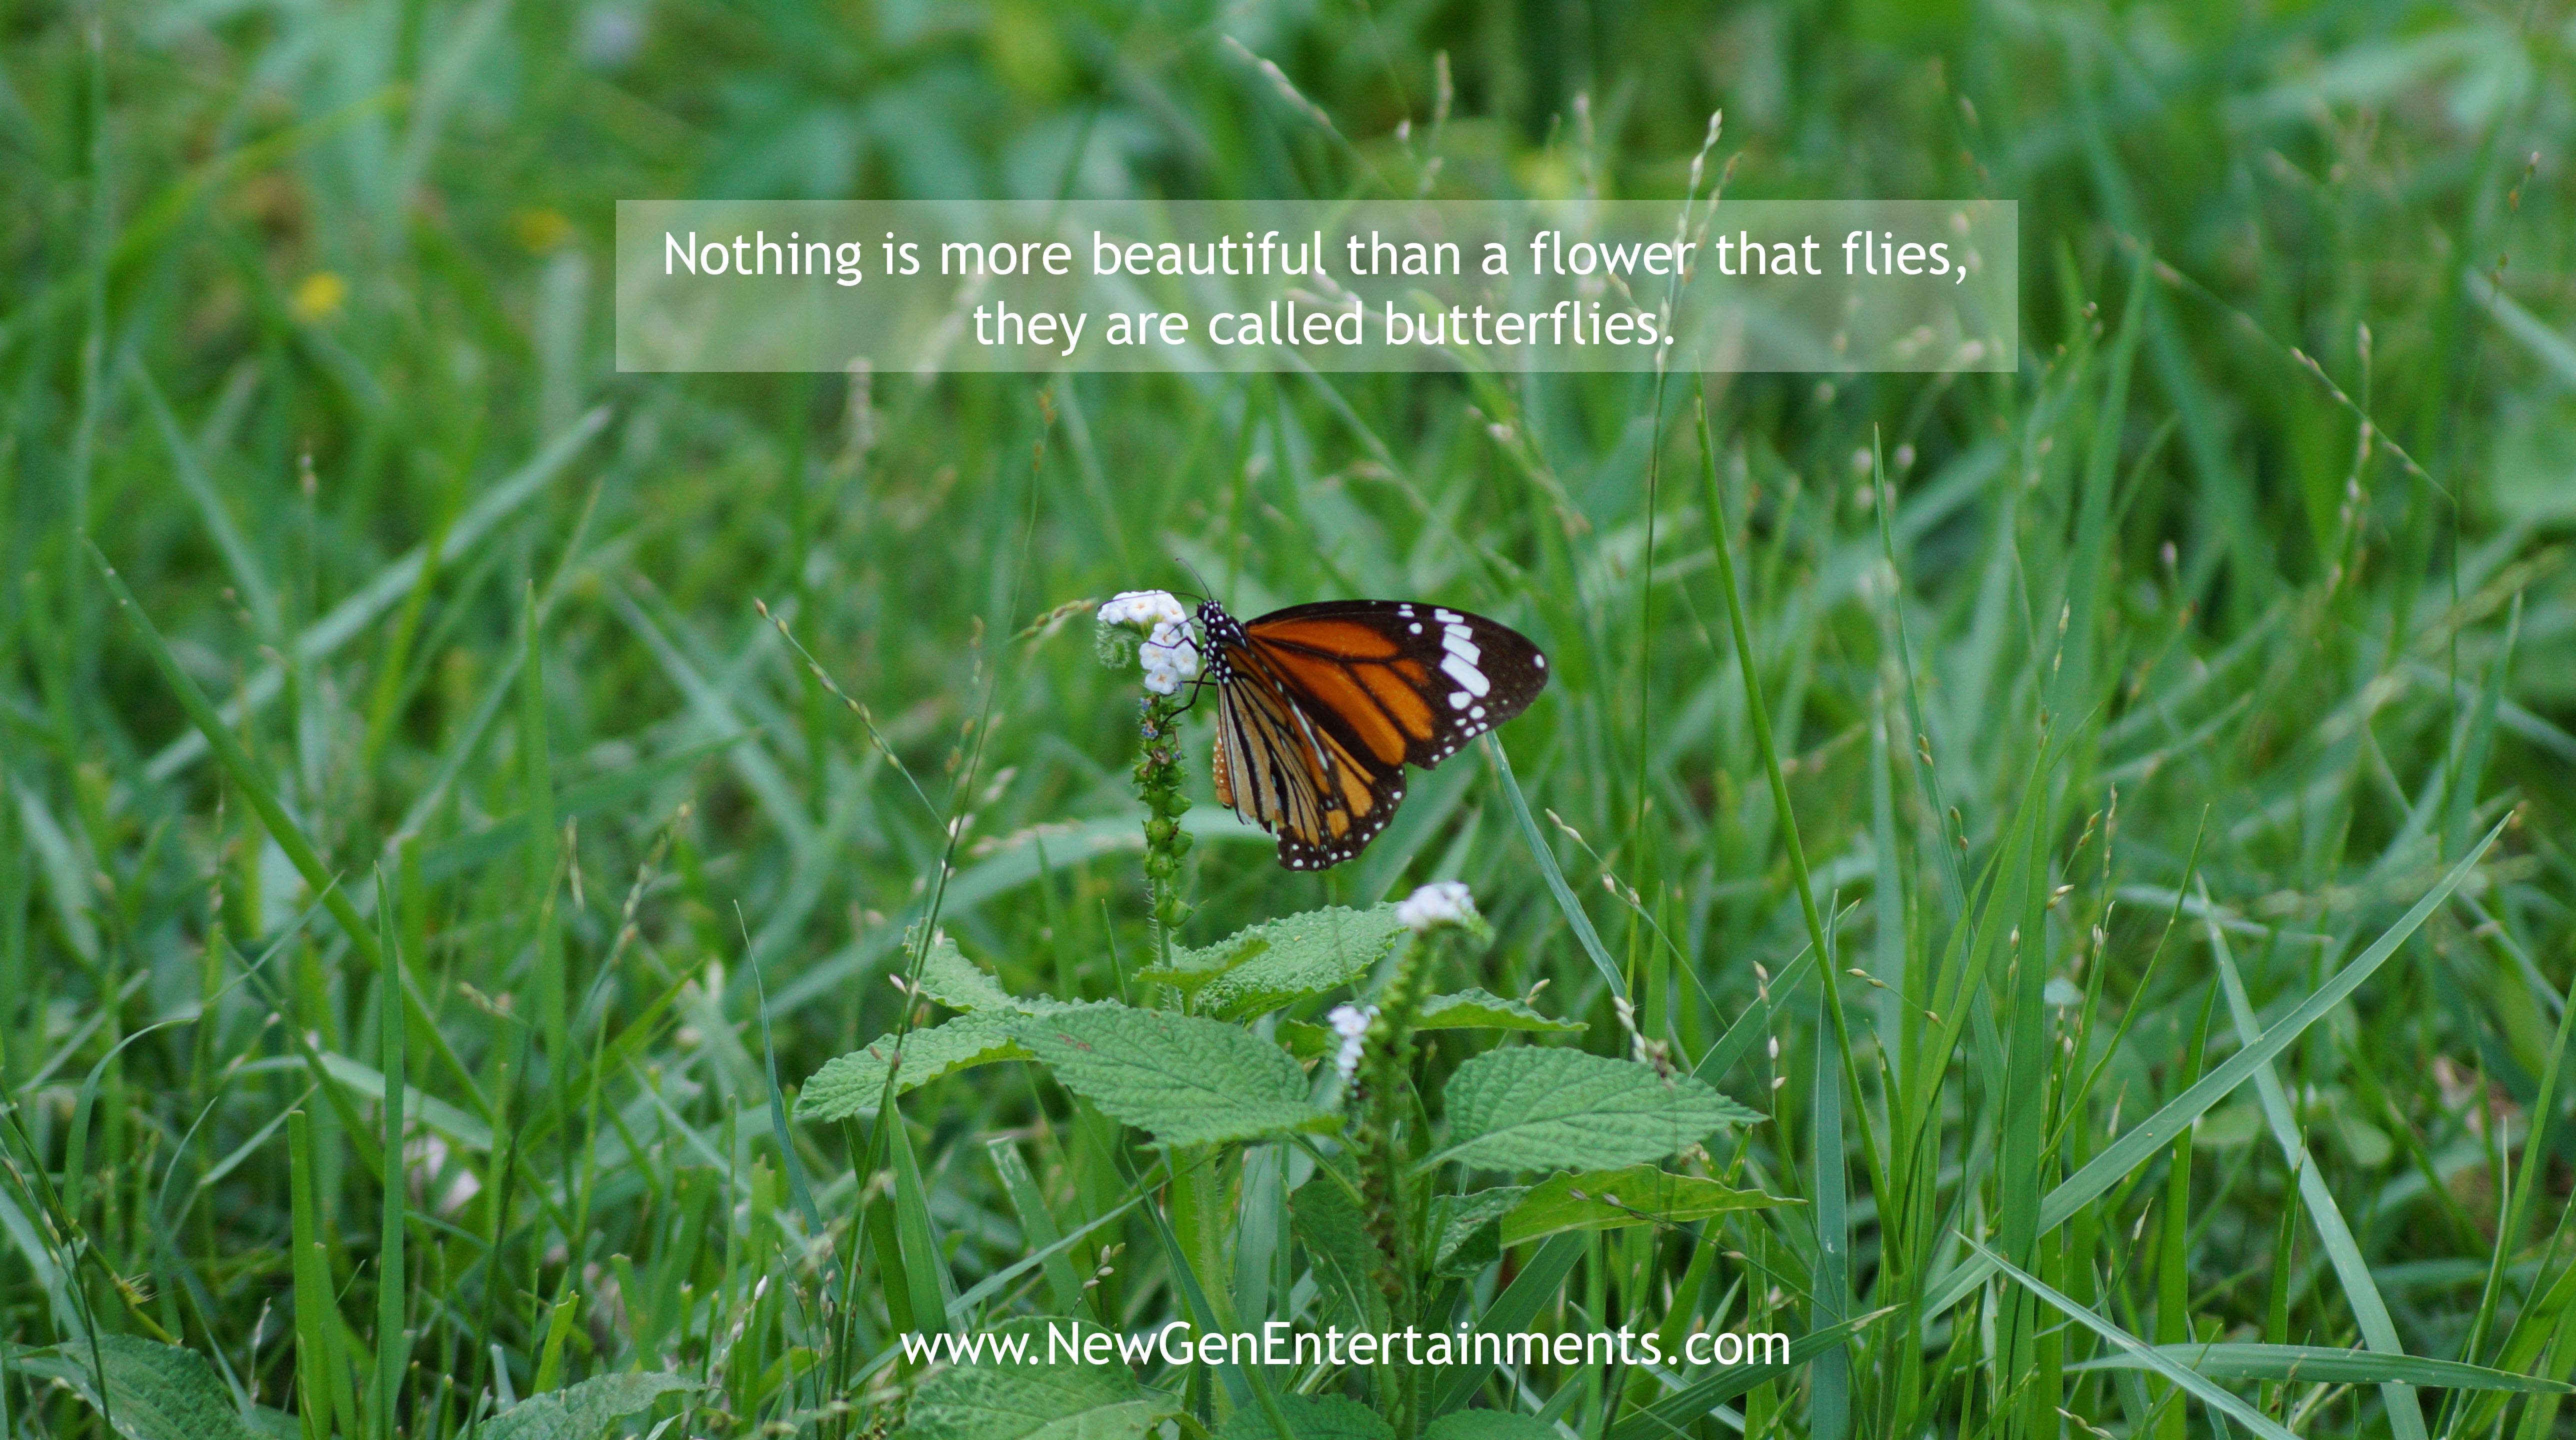 Nothing is more beautiful than a flower that flies, they are called butterflies